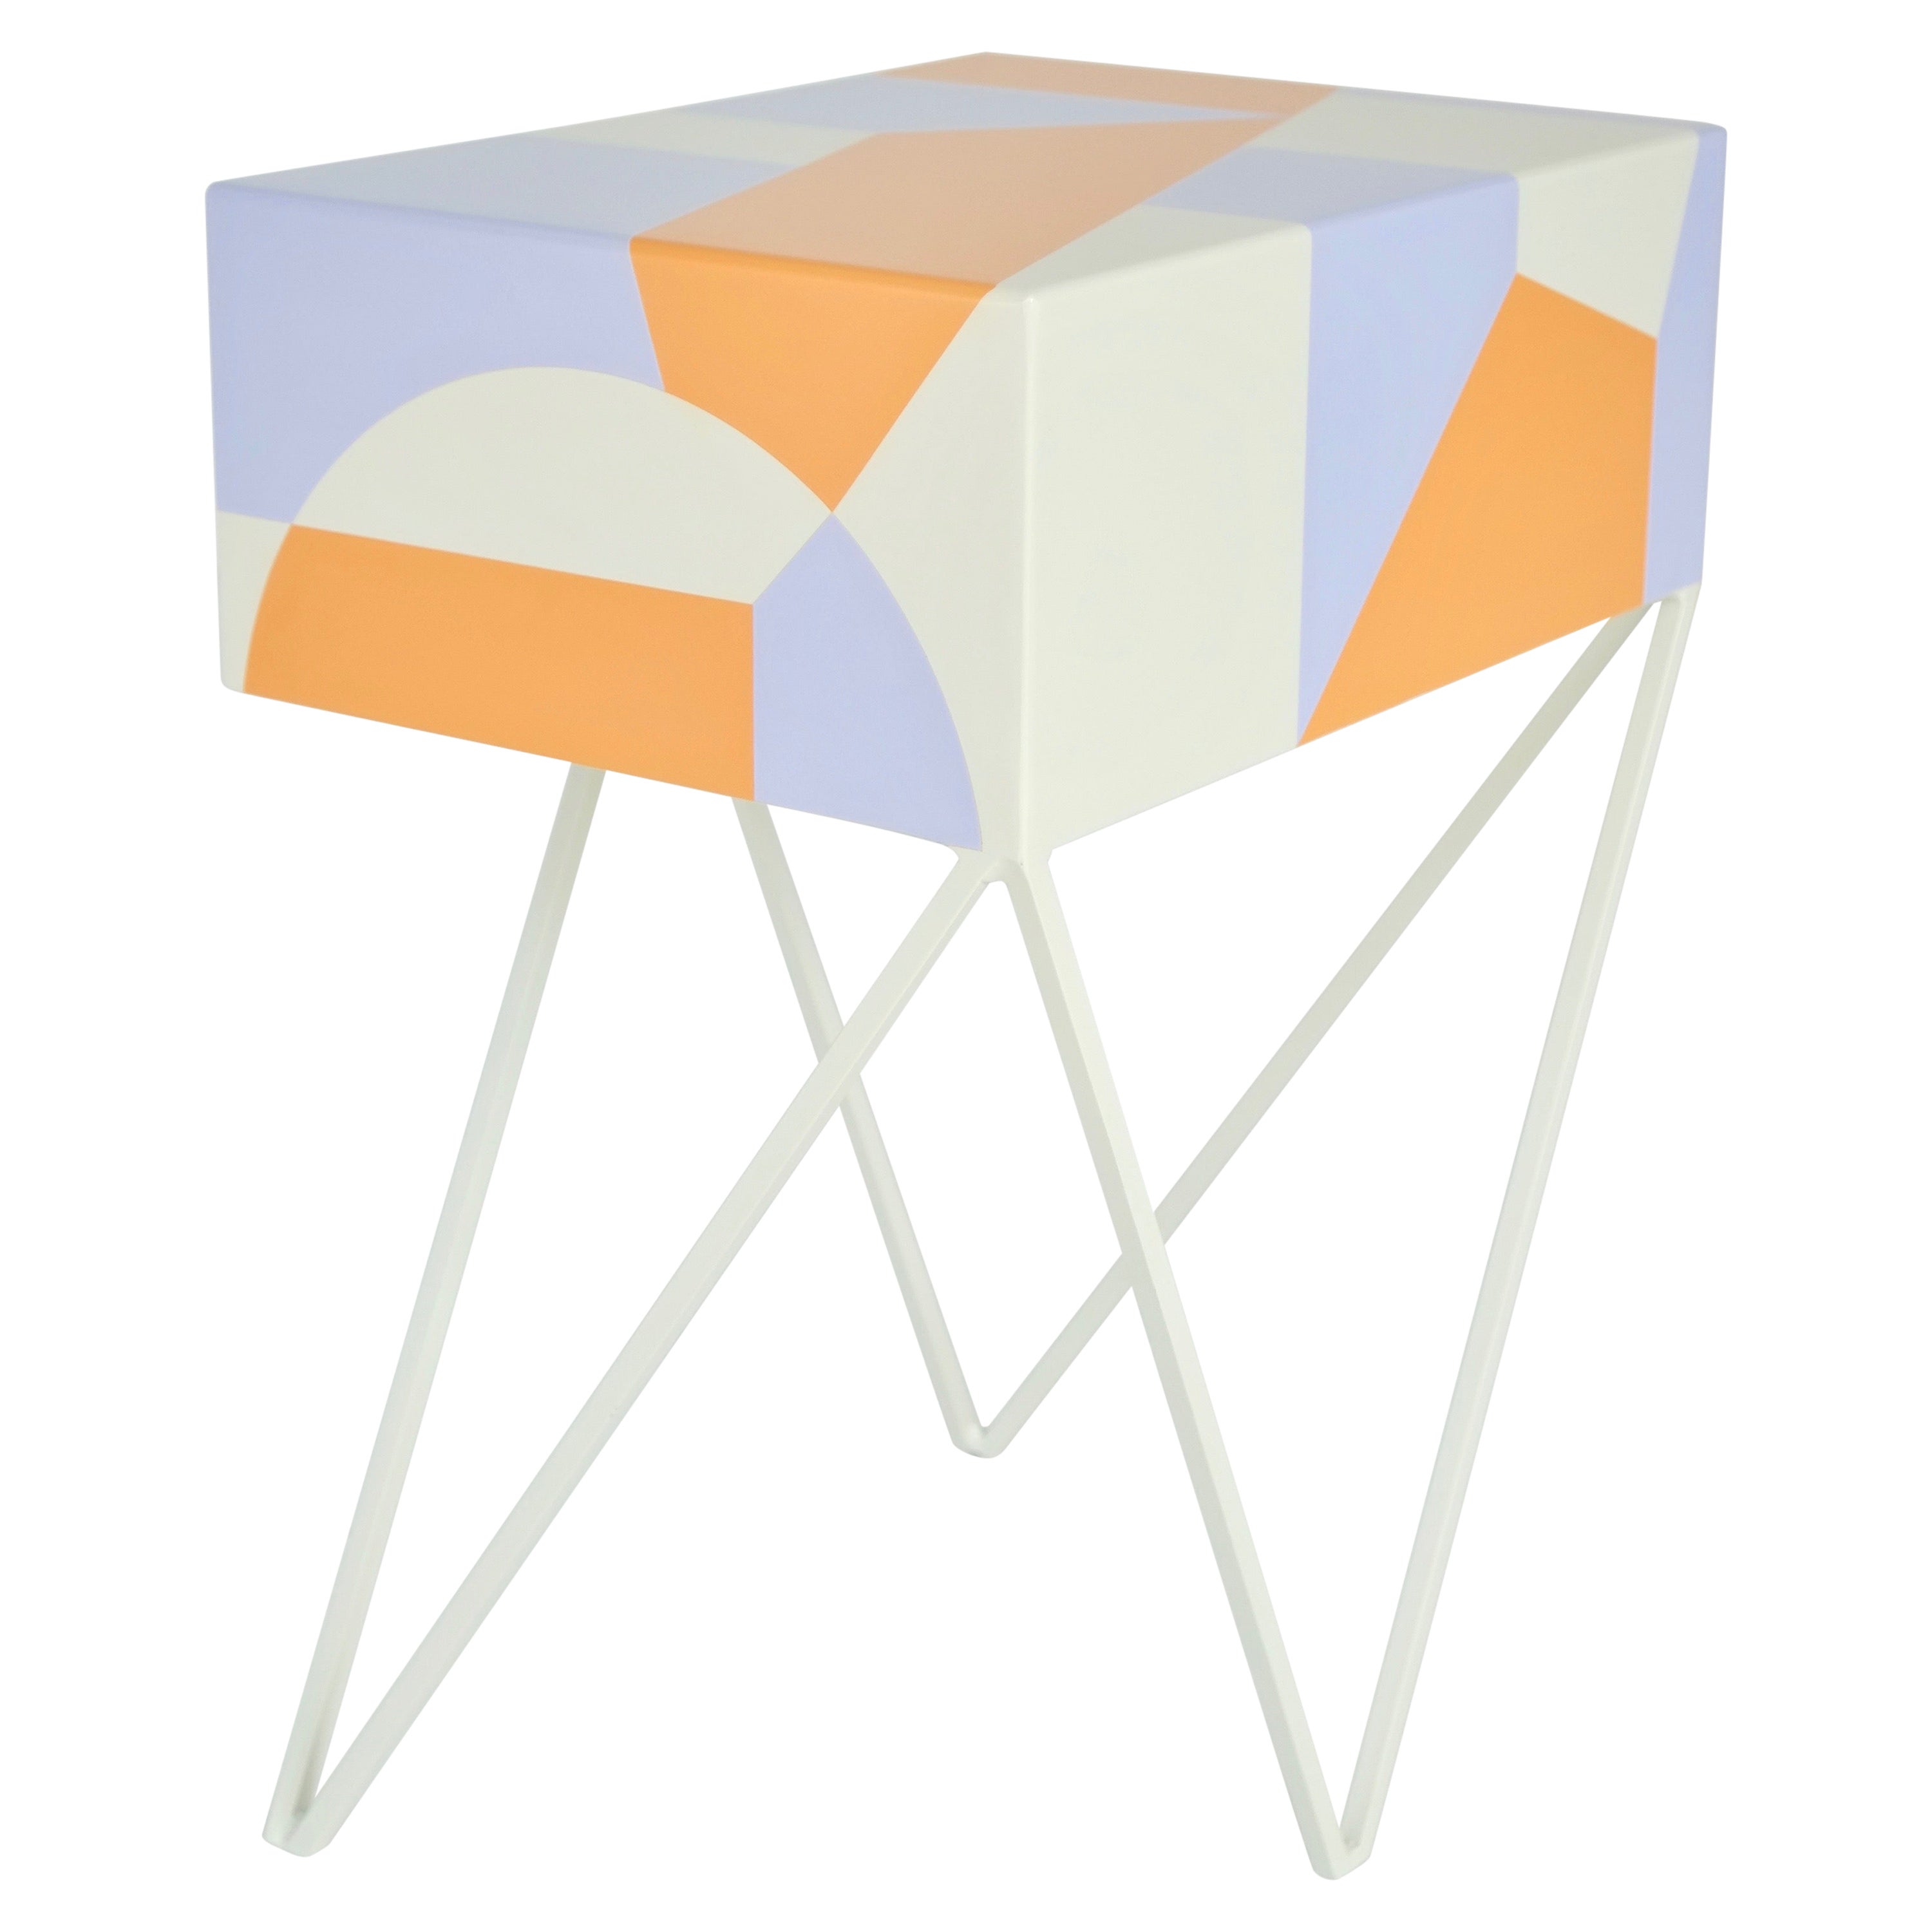 One Off Experimental Robot Side Table with Geometric Design